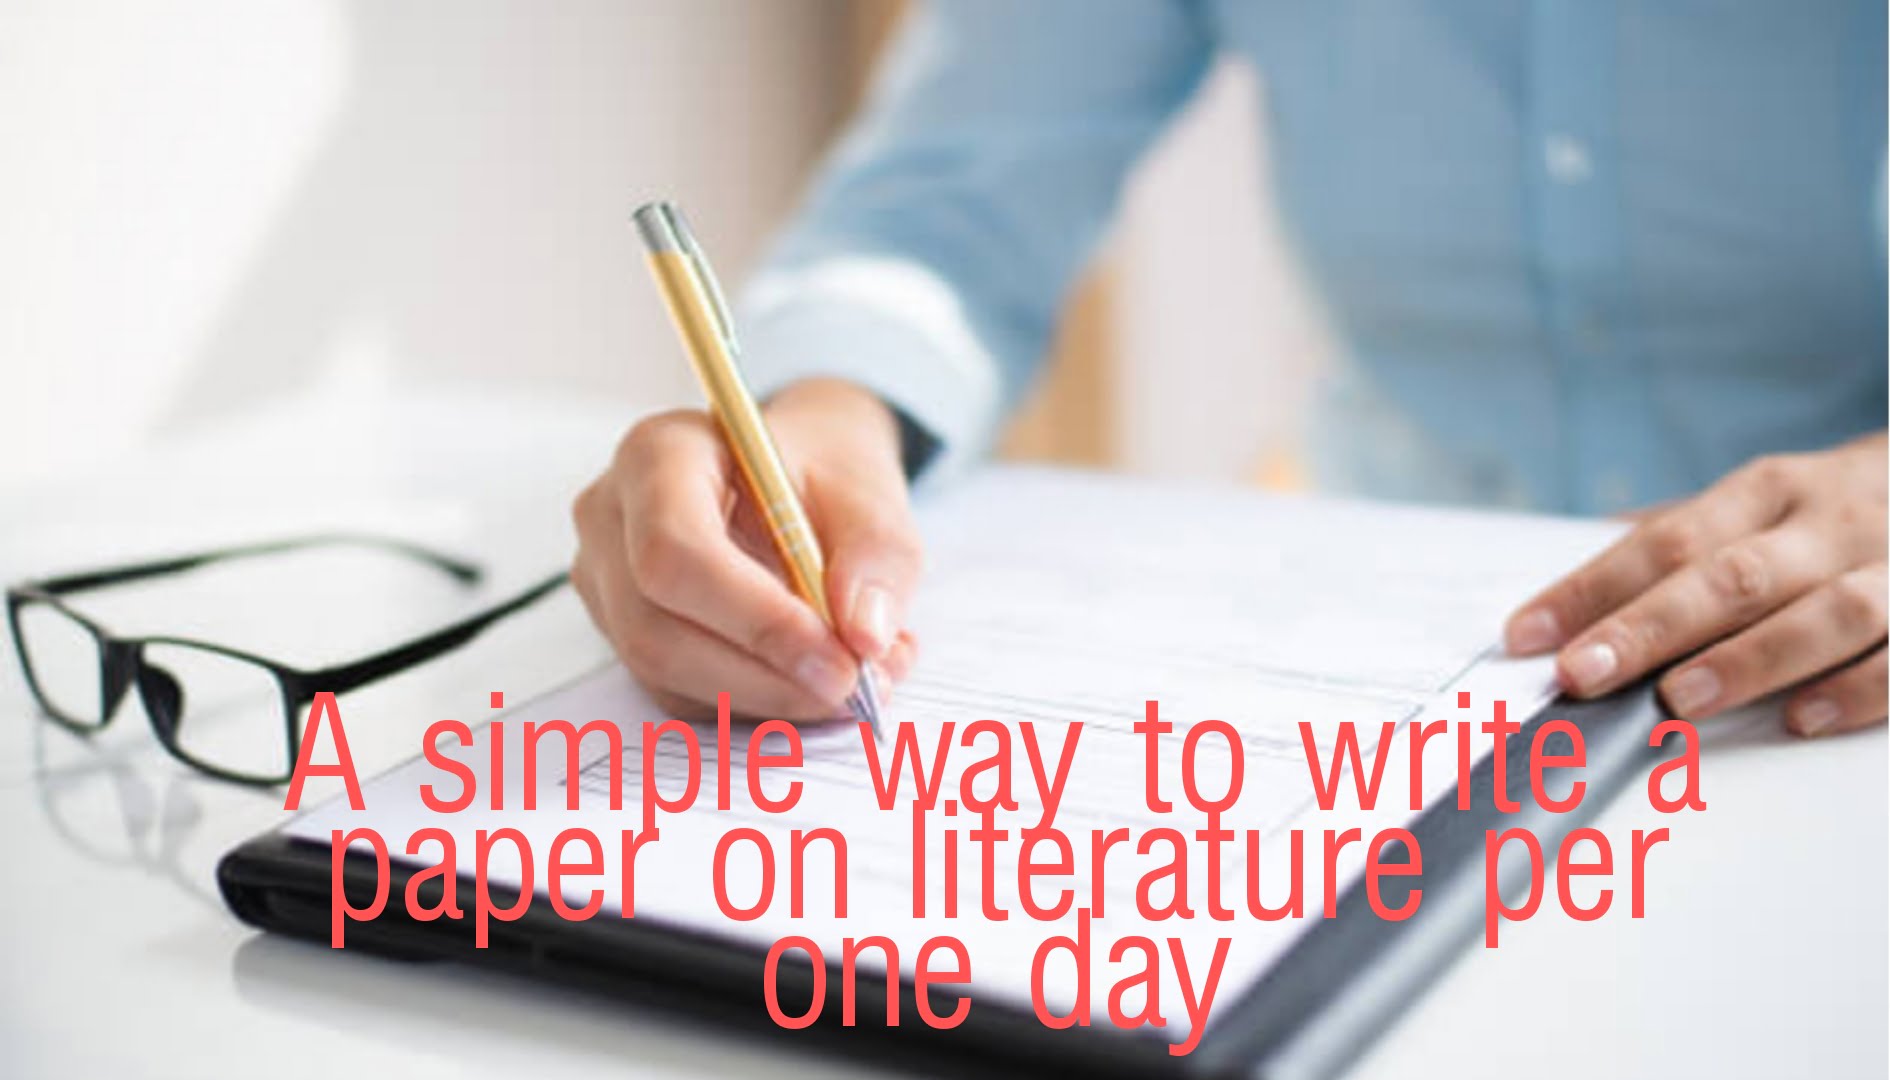 A simple way to write a paper on literature per one day